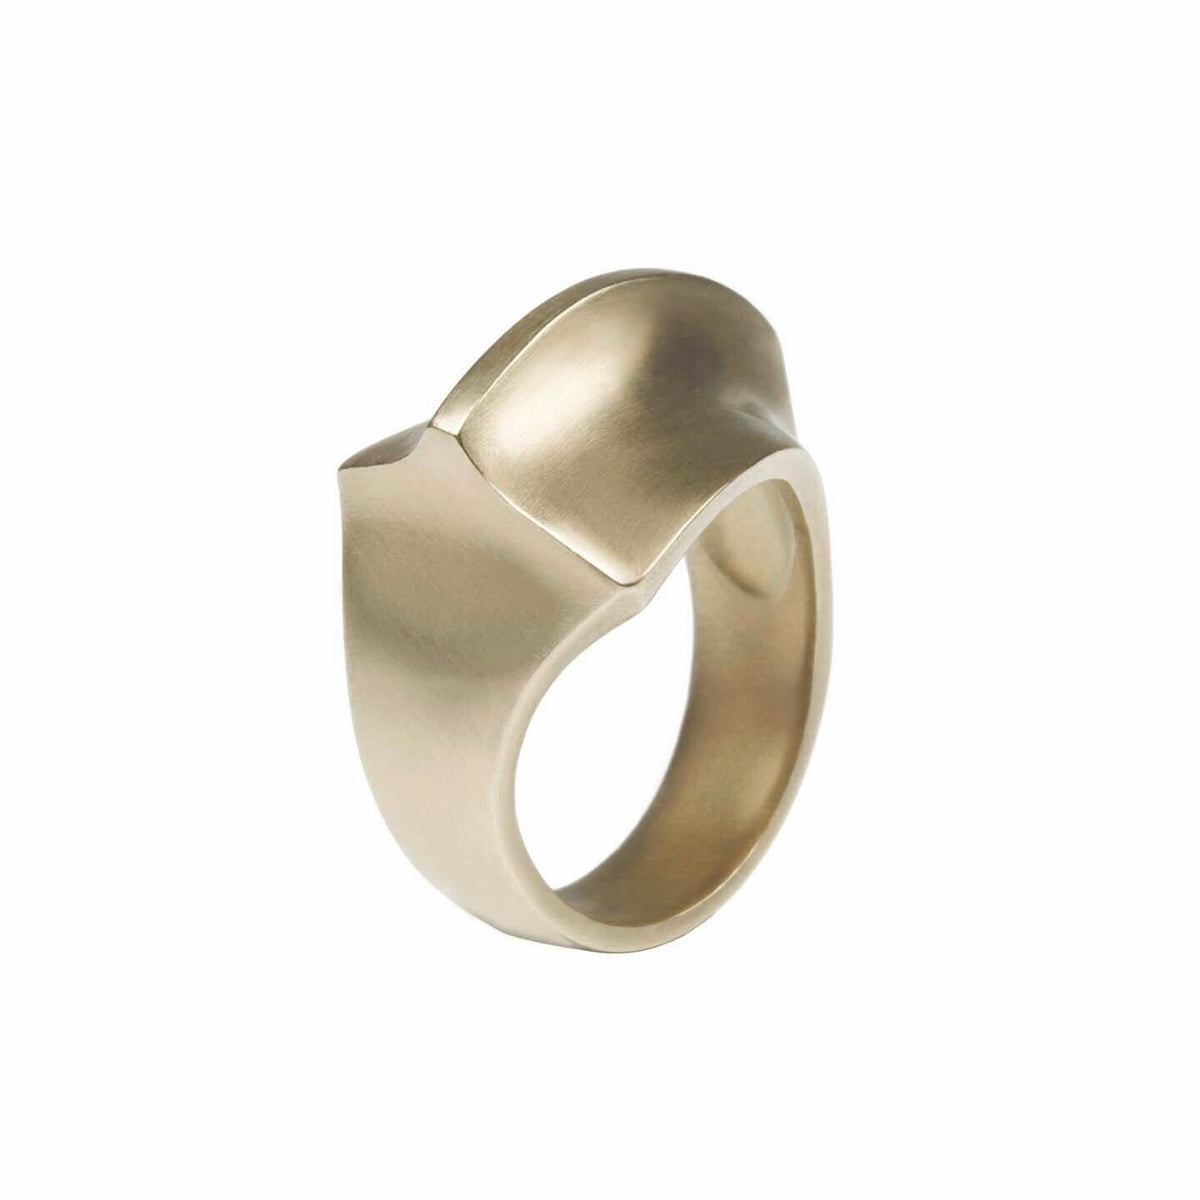 Adult Wall Ring - Brass